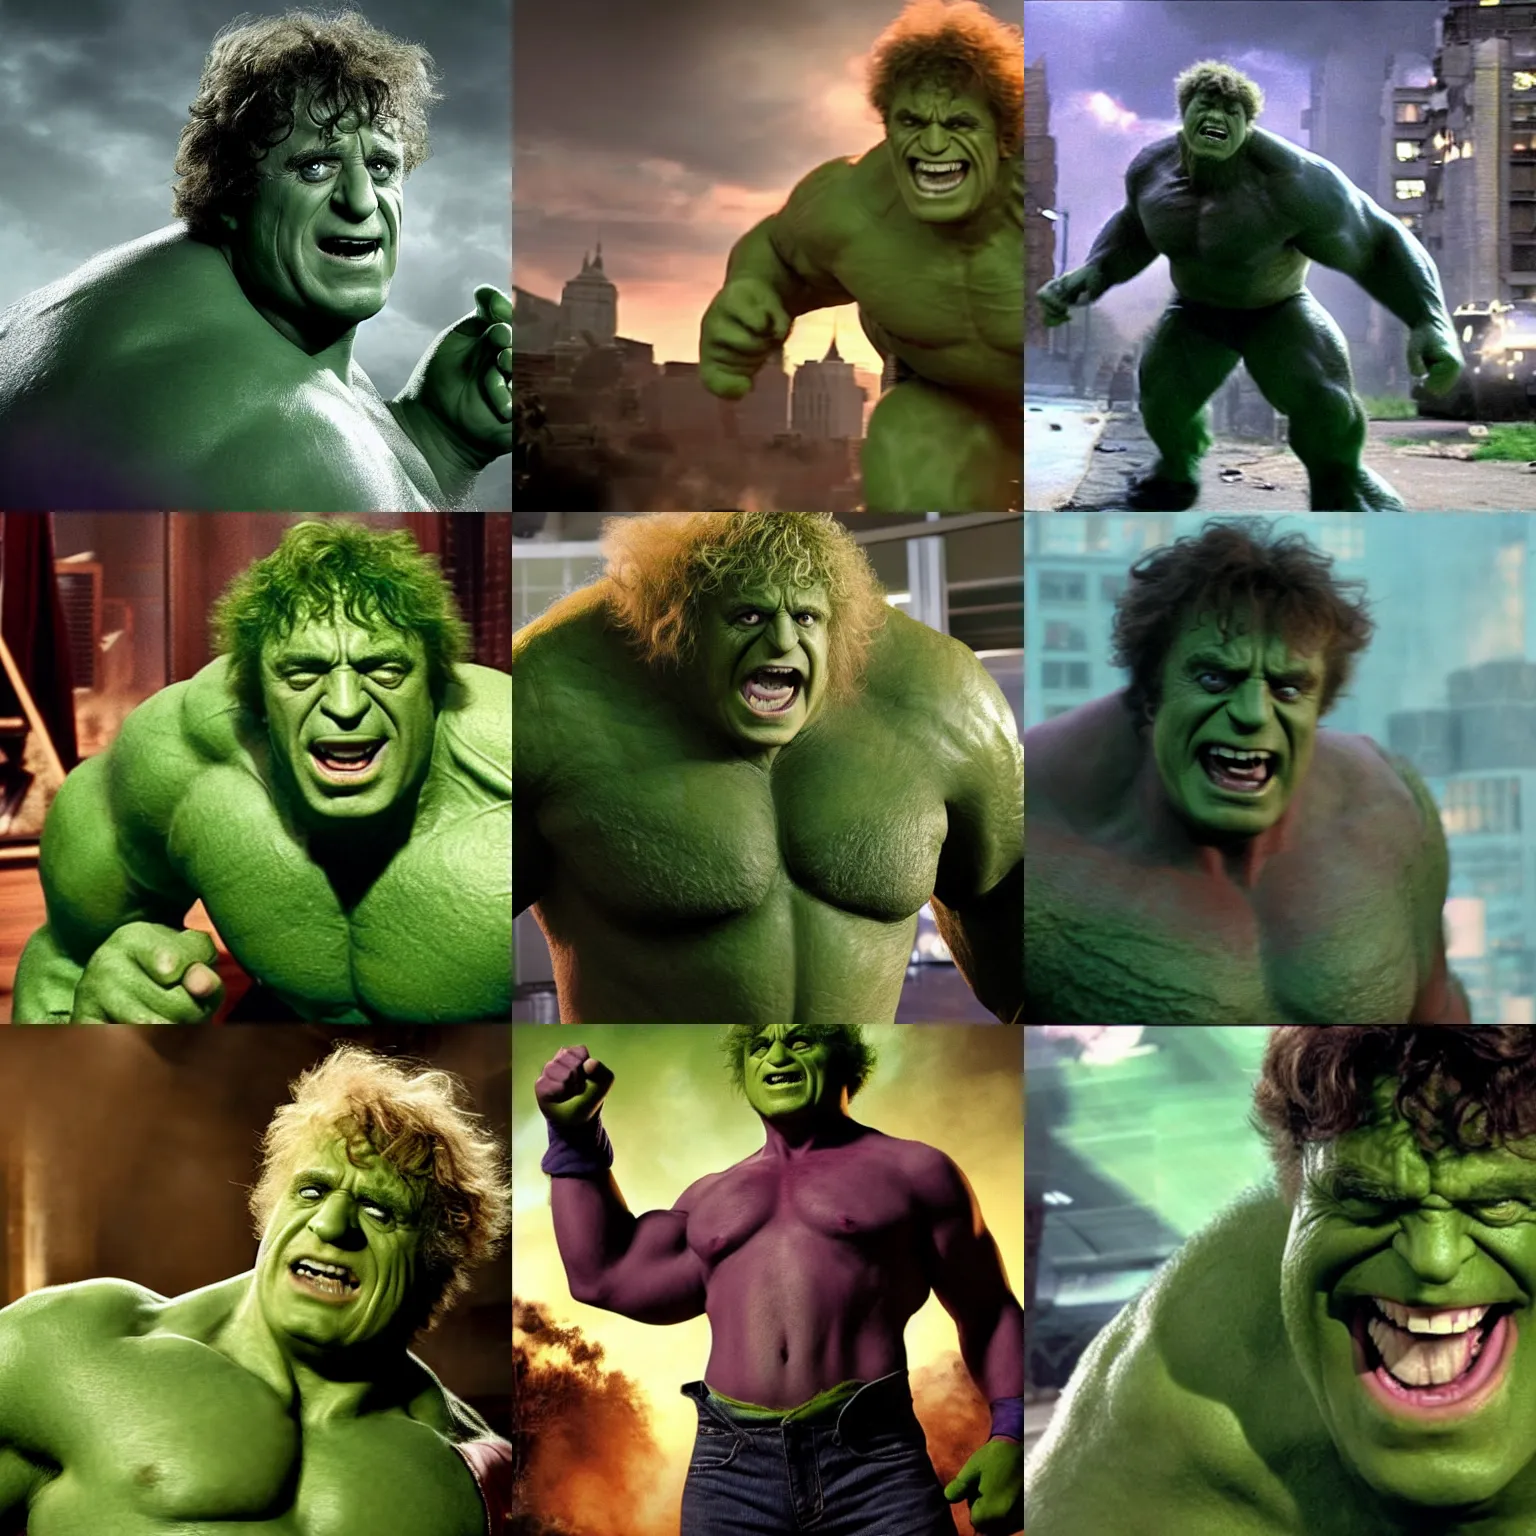 Prompt: Gene Wilder as the Hulk from the MCU in The Avengers (2012), photograph